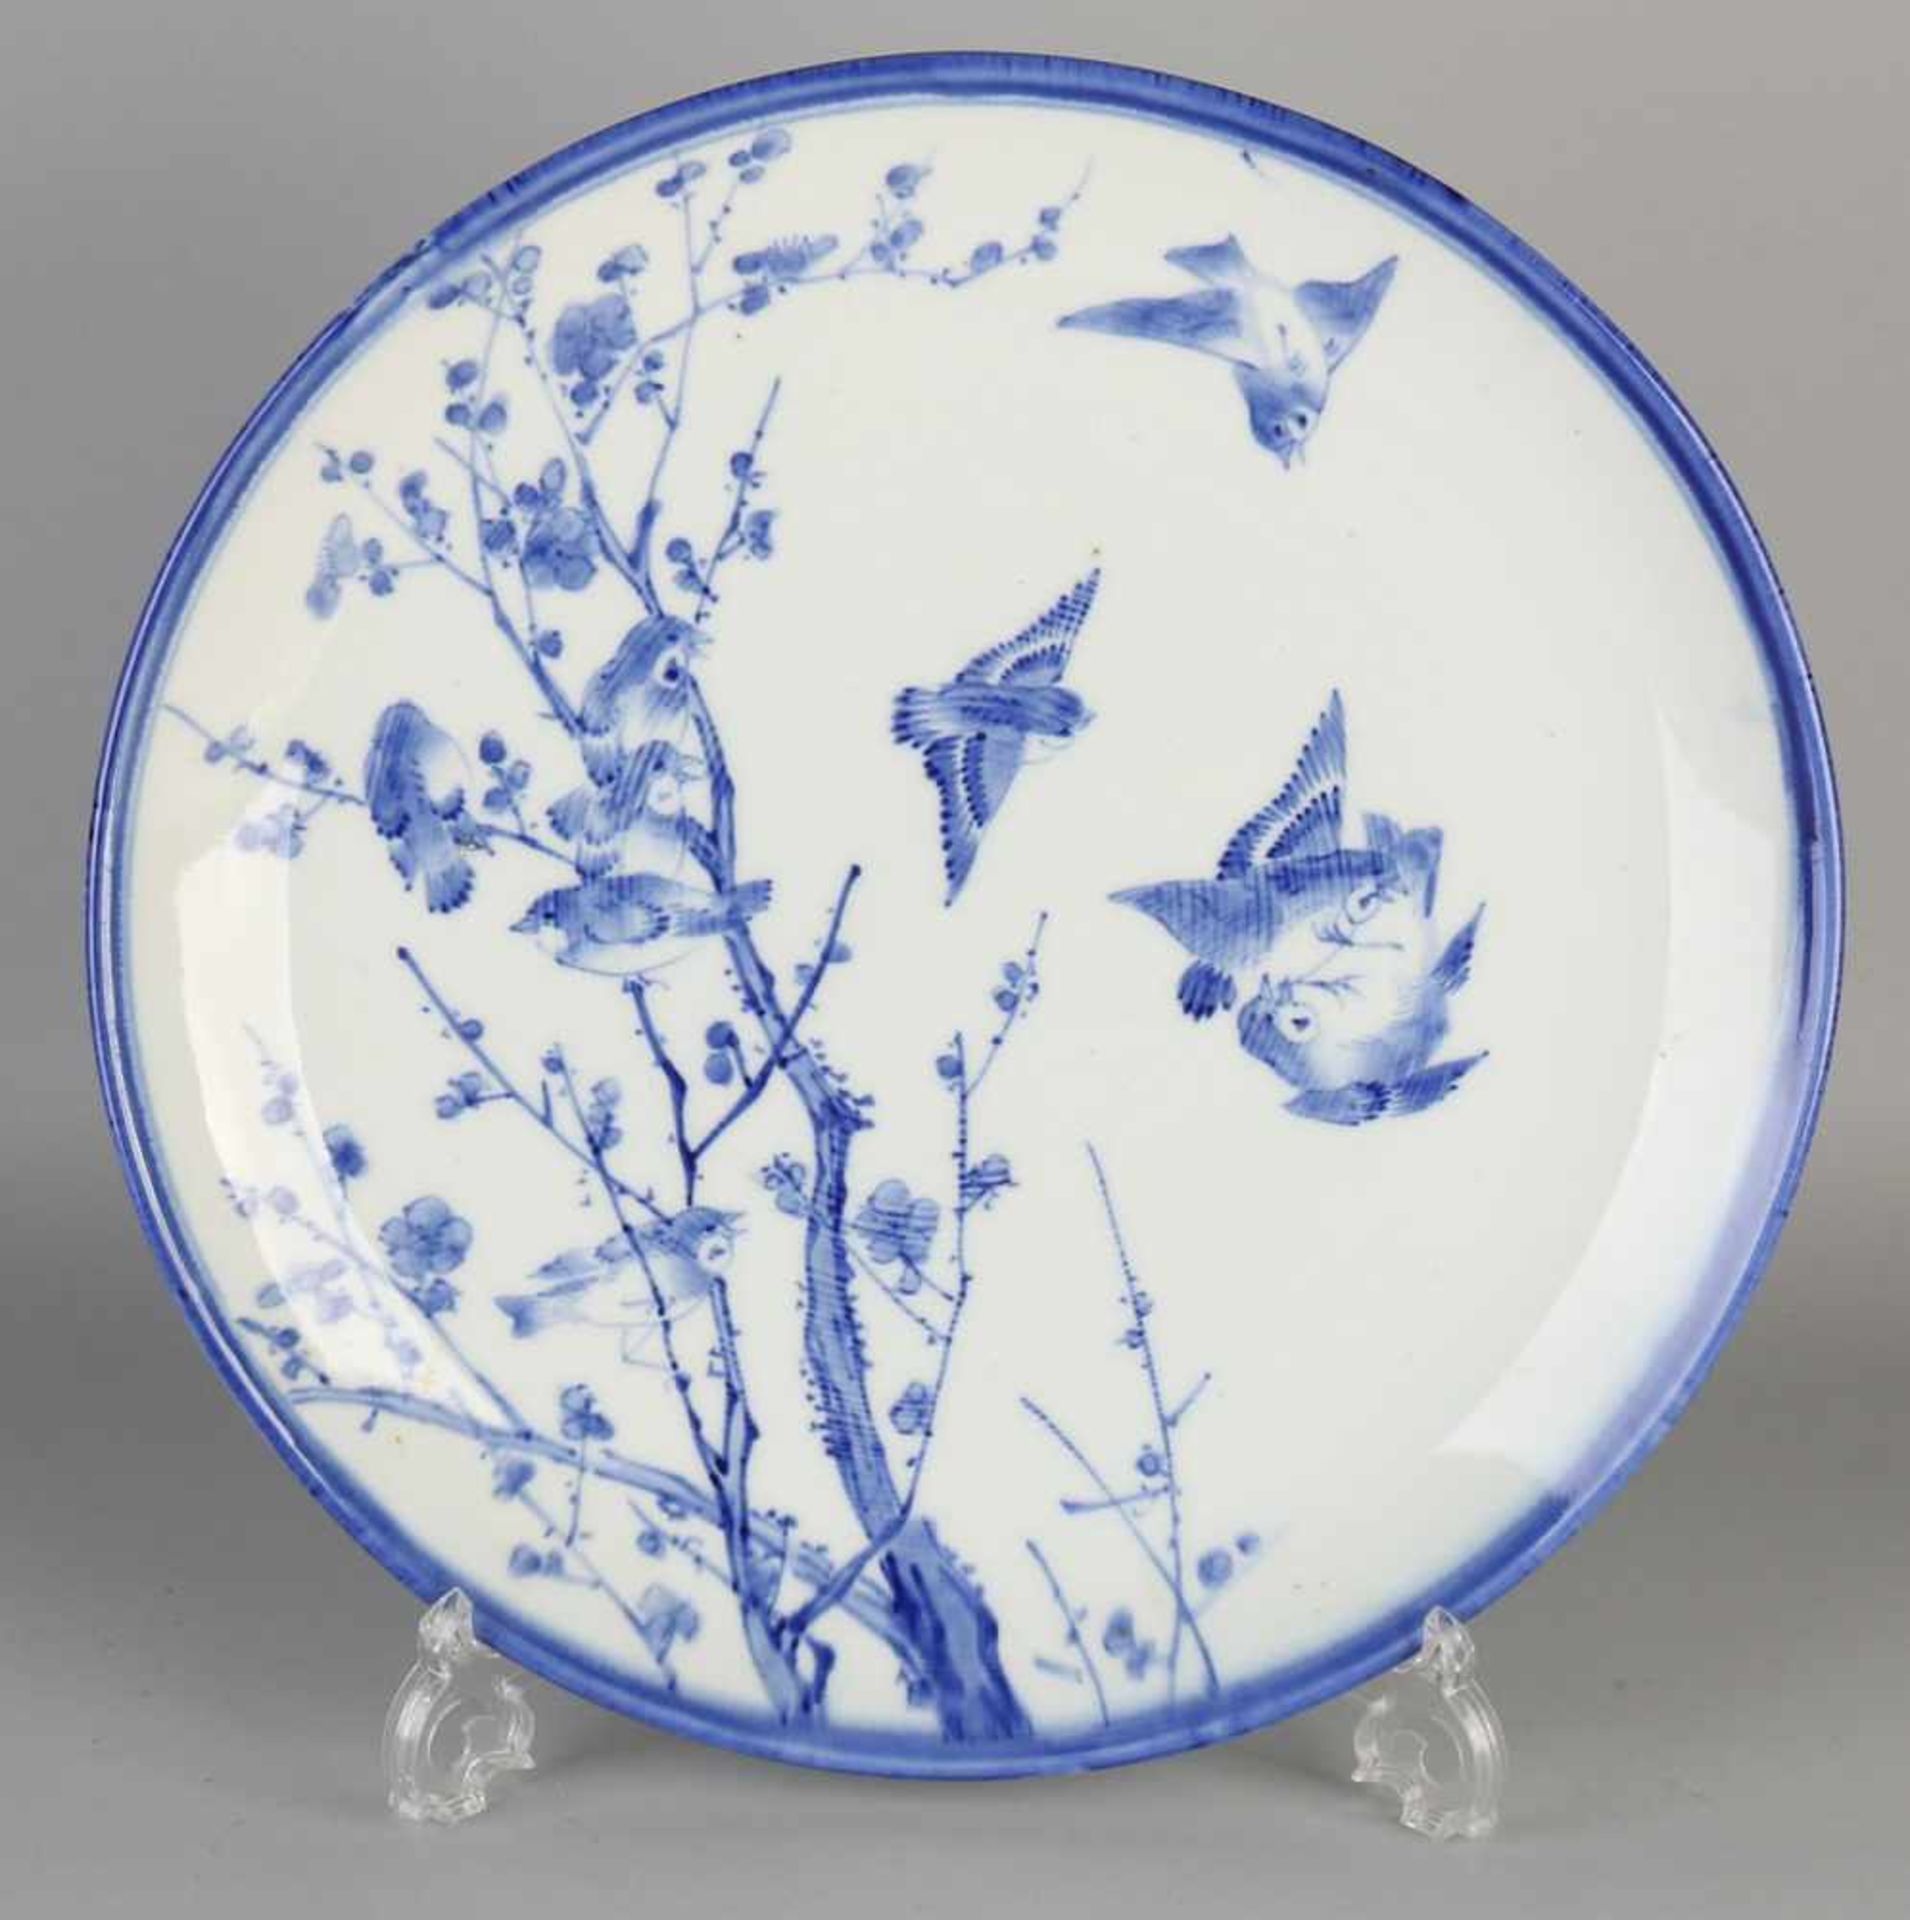 Large 19th century Japanese porcelain dish with birds / blossom decor. Size: ø 37 cm. In good